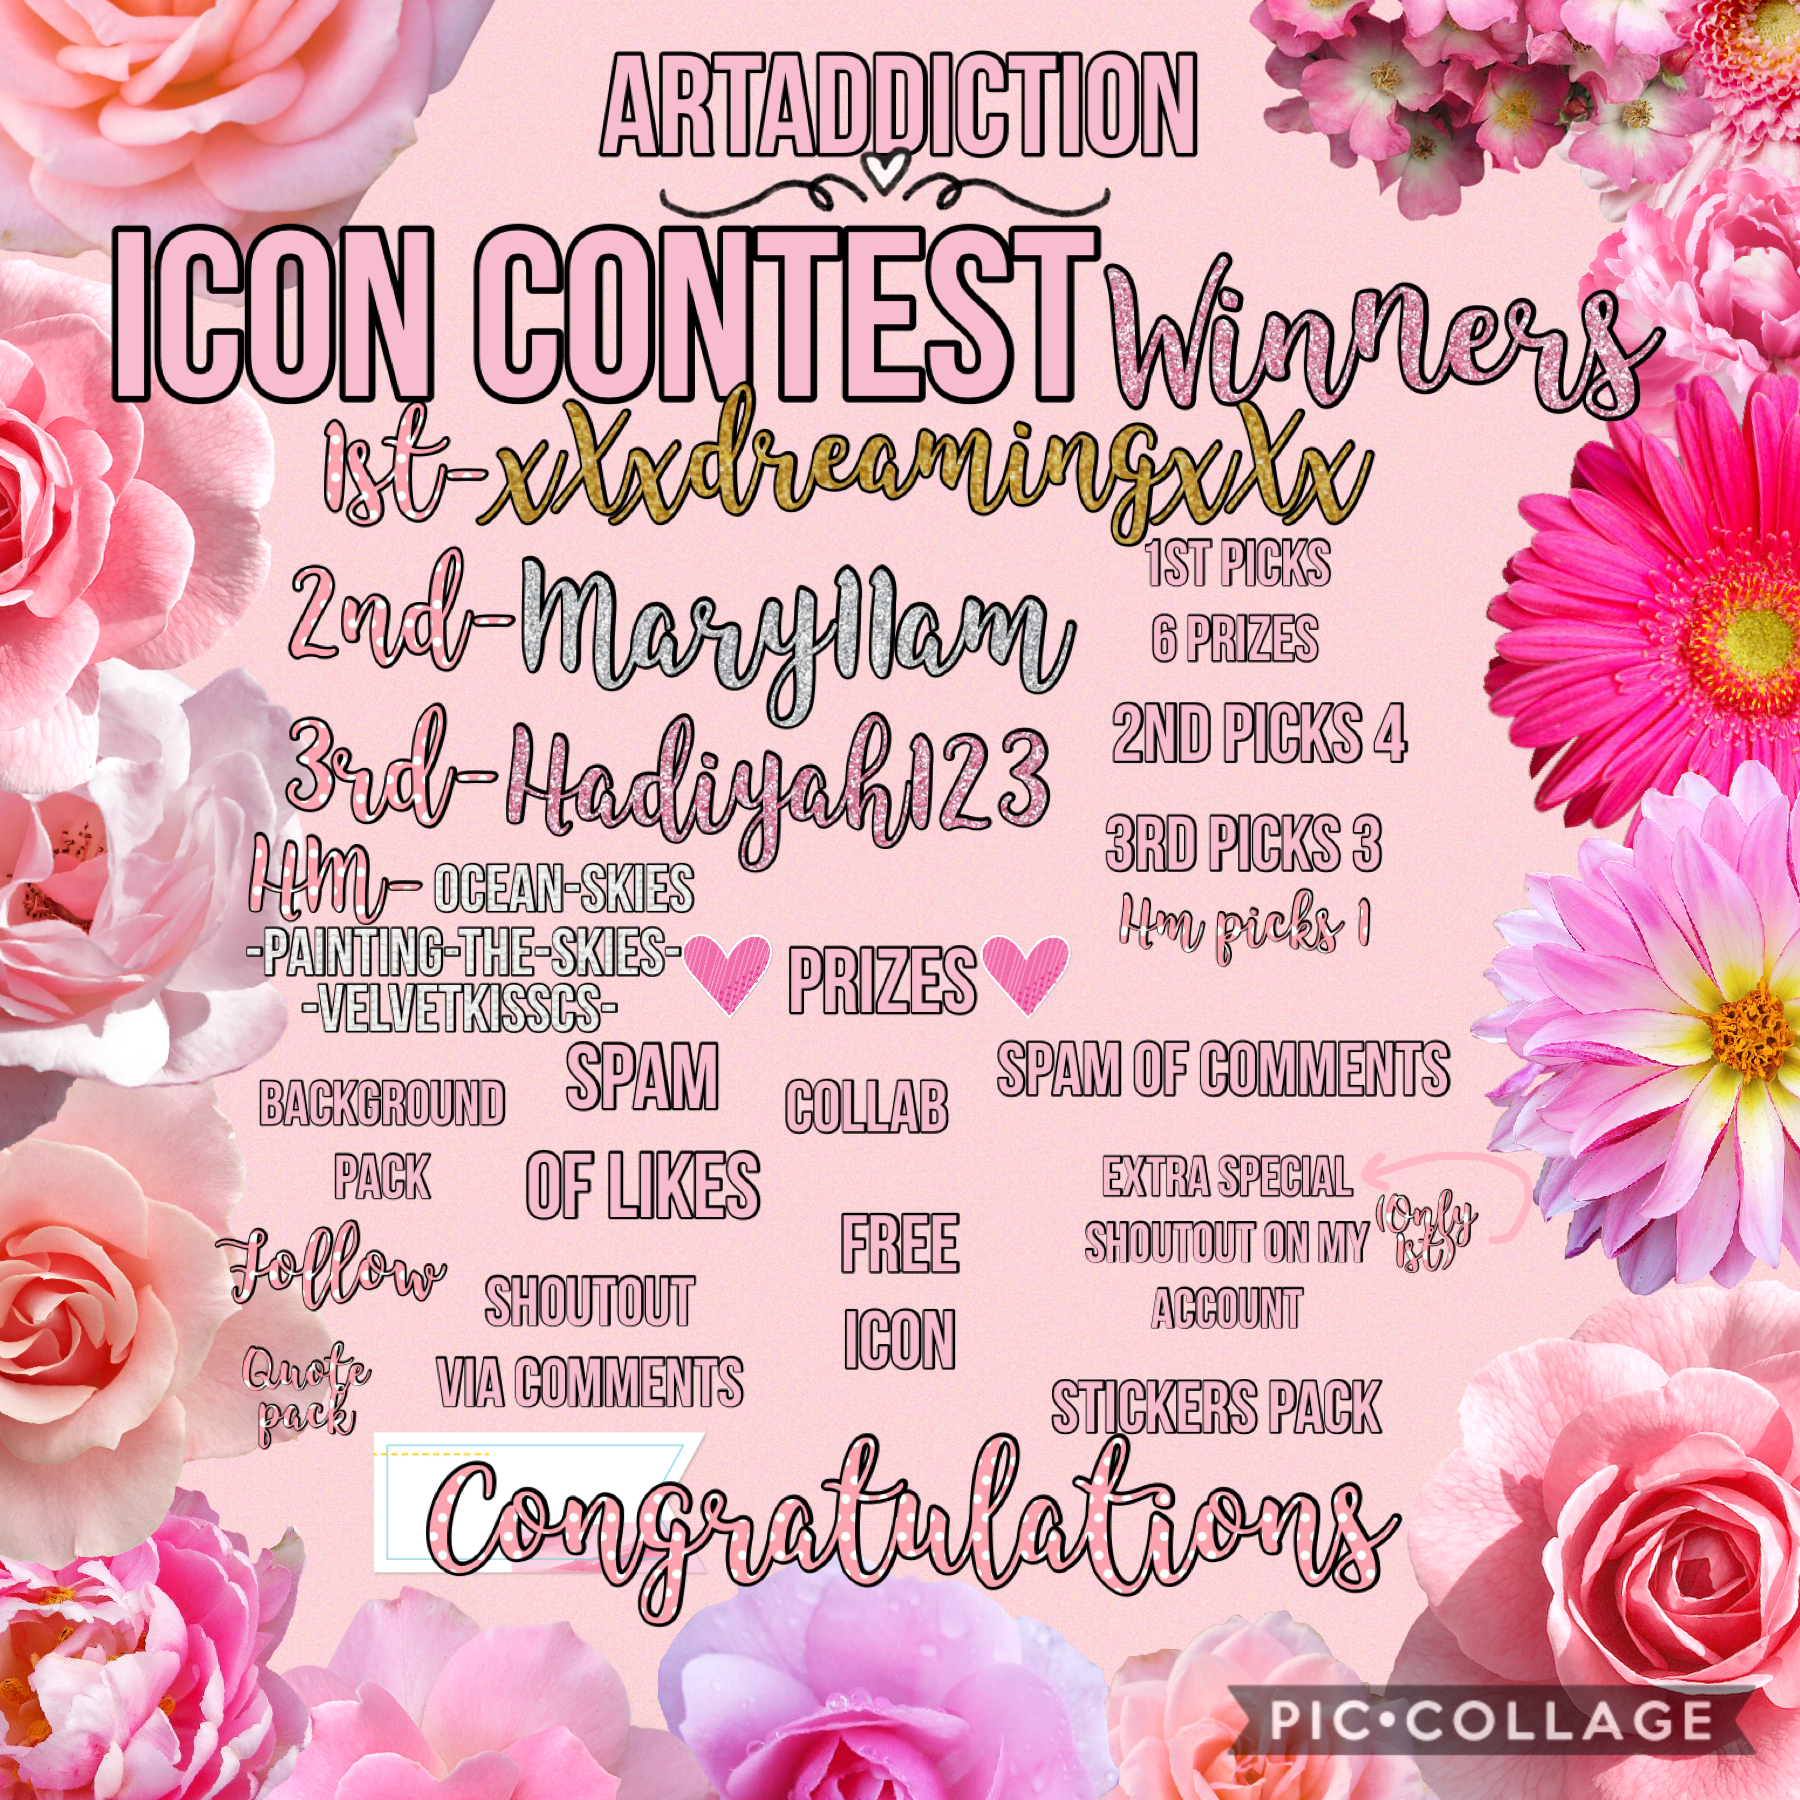 Congrats, it was defo the hardest icon contest, u guys are so talented 💖💖🤧